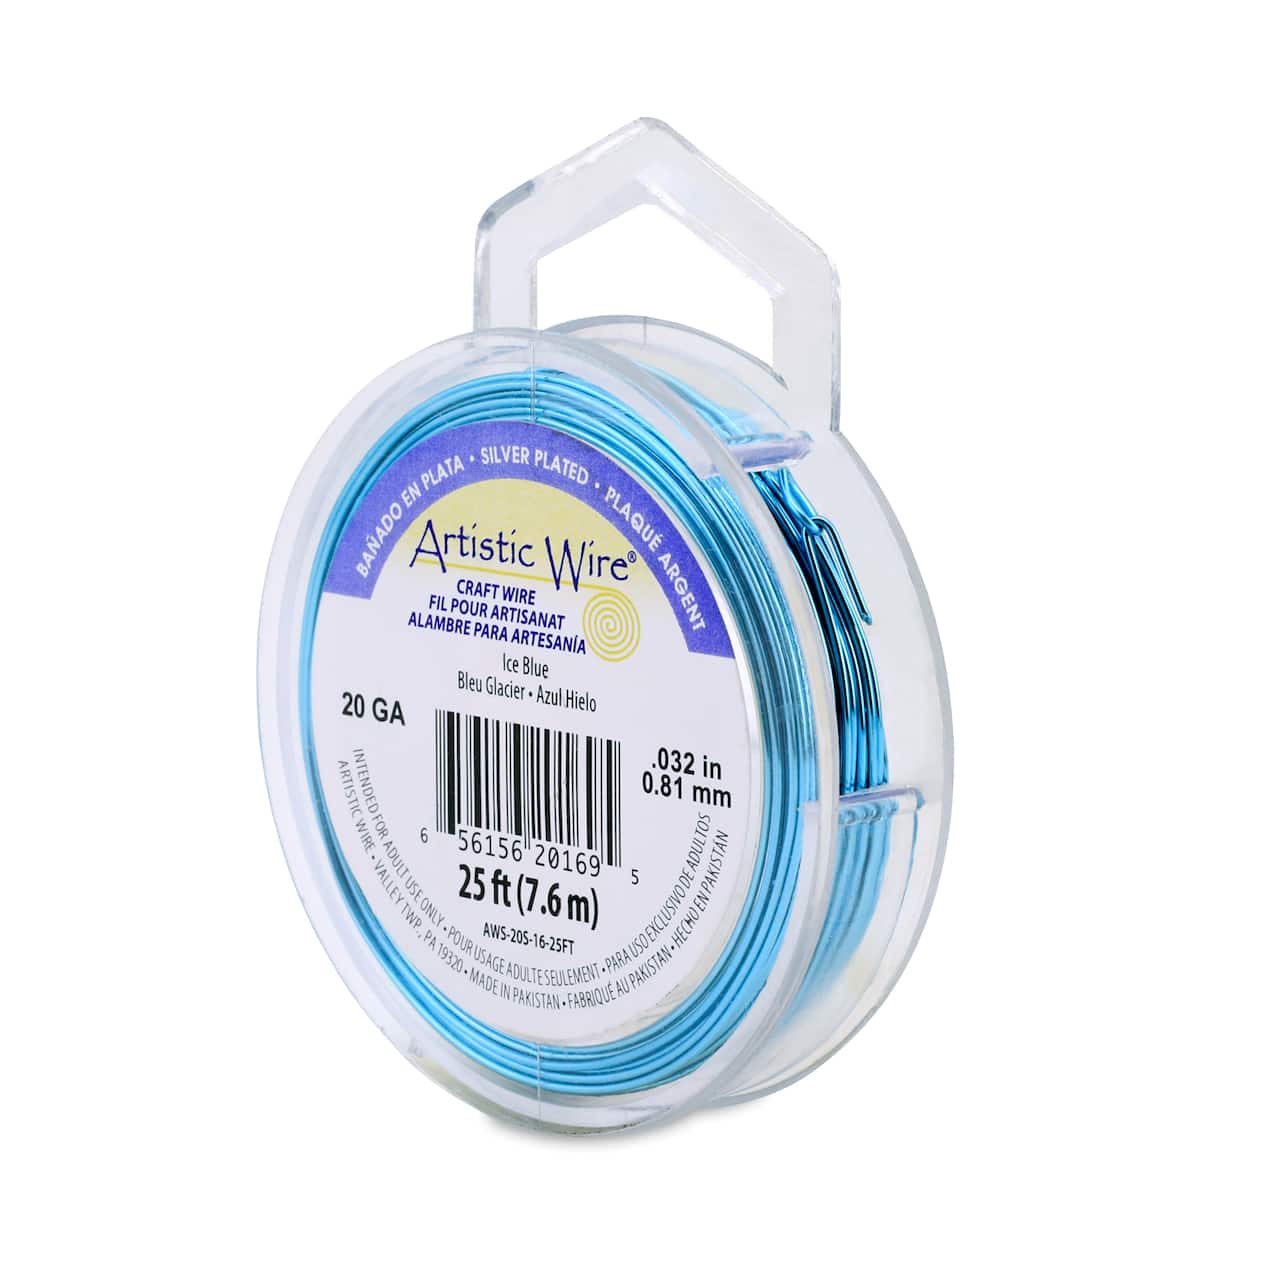 Artistic Wire 20-Gauge Silver Plated Ice Blue Coil Wire, 25-Feet